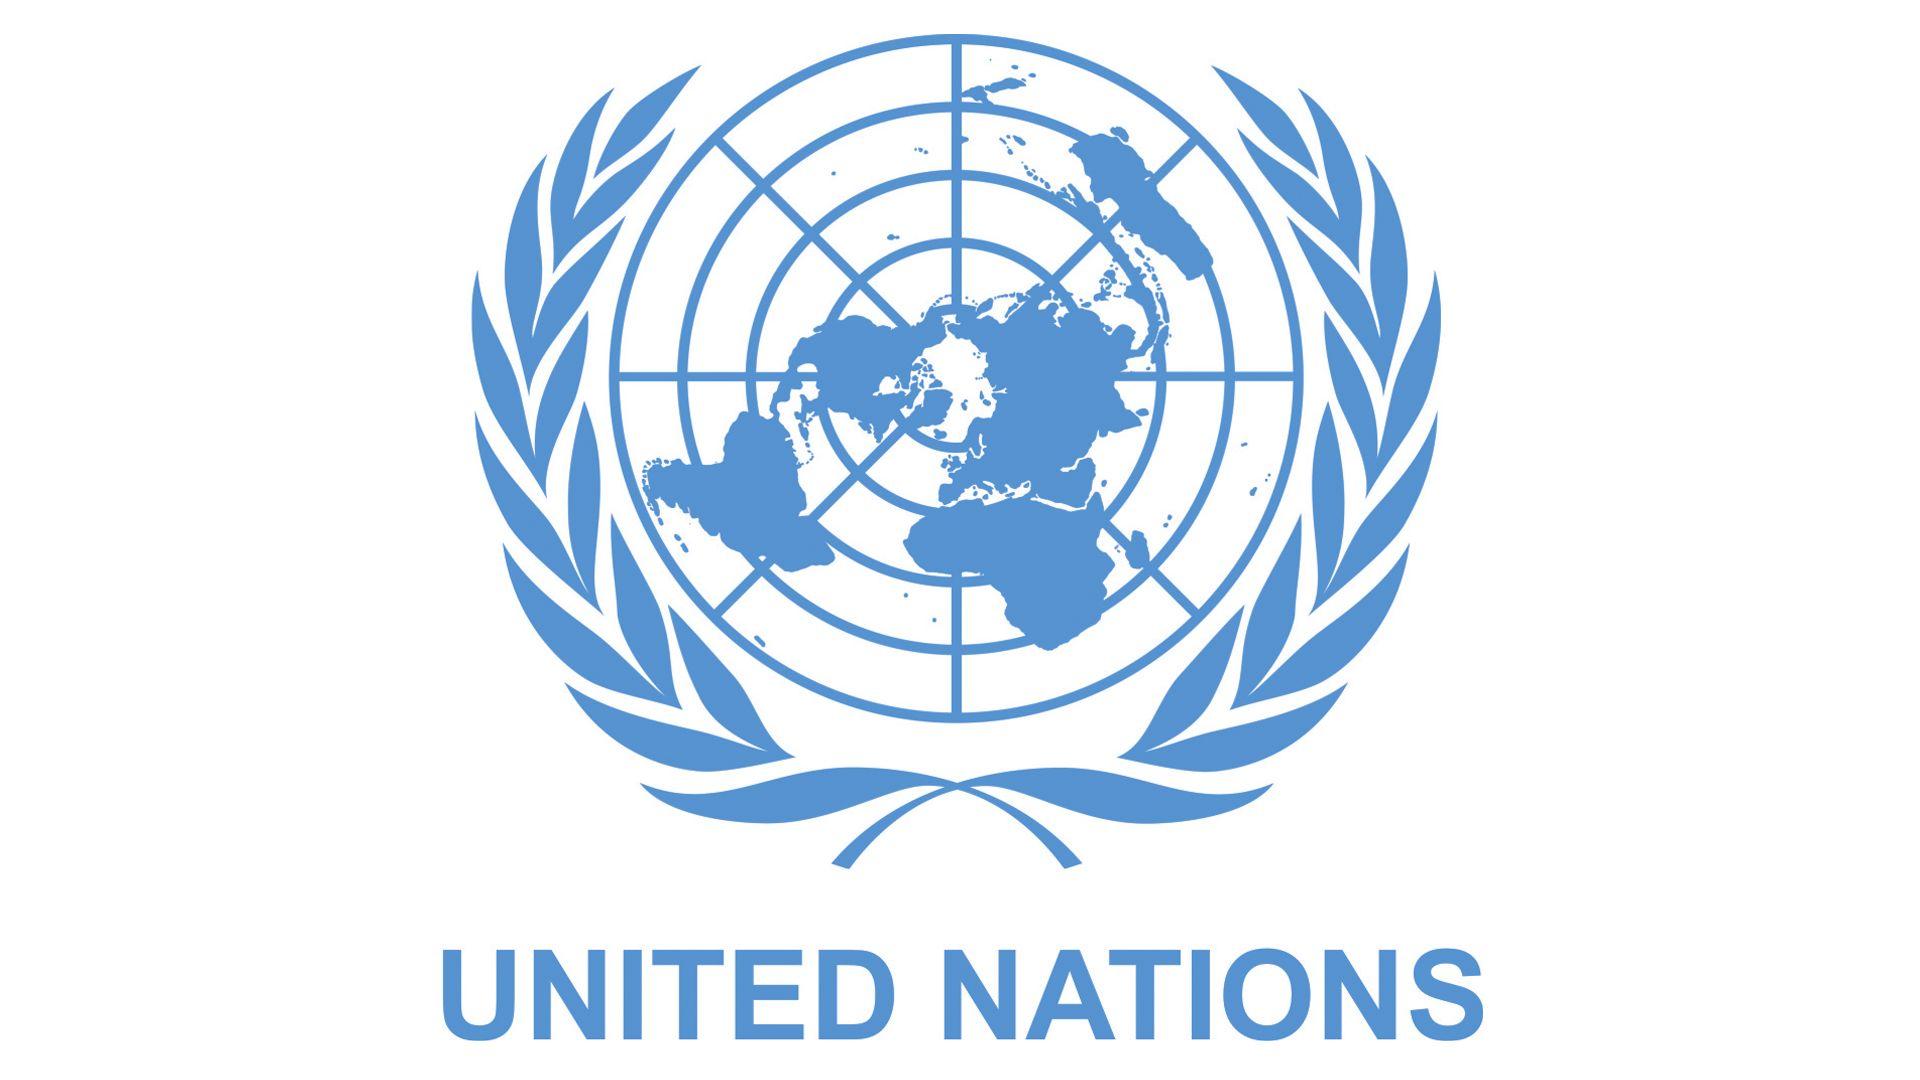 United Nations Logo - United Nations Logo, United Nations Symbol, Meaning, History